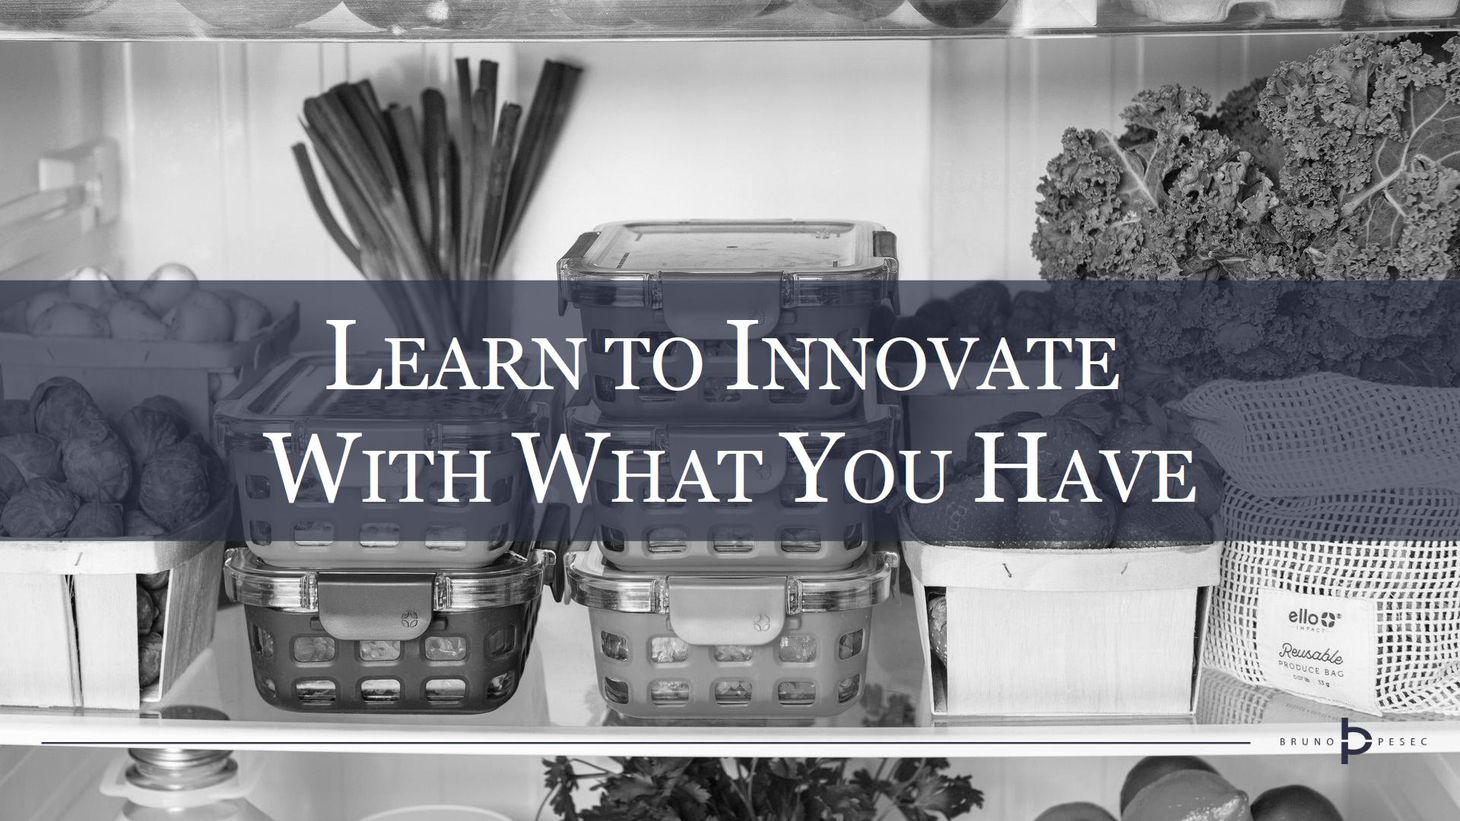 Innovate with what you have